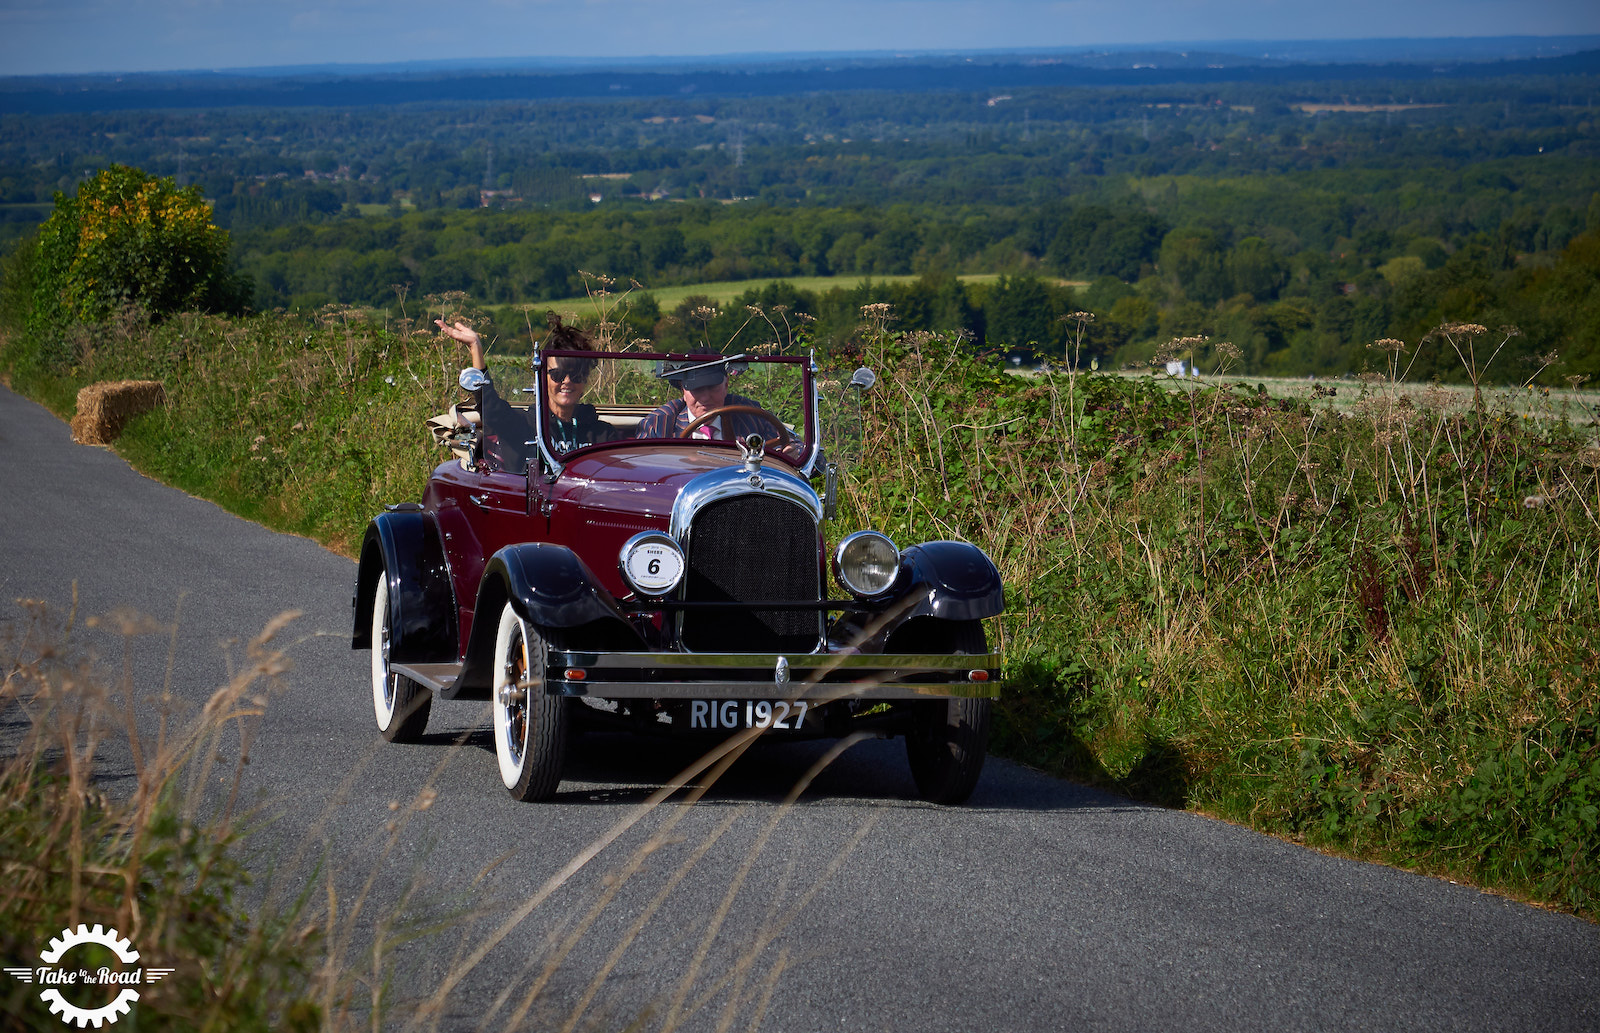 Shere Hill Climb 2019 reaches new heights